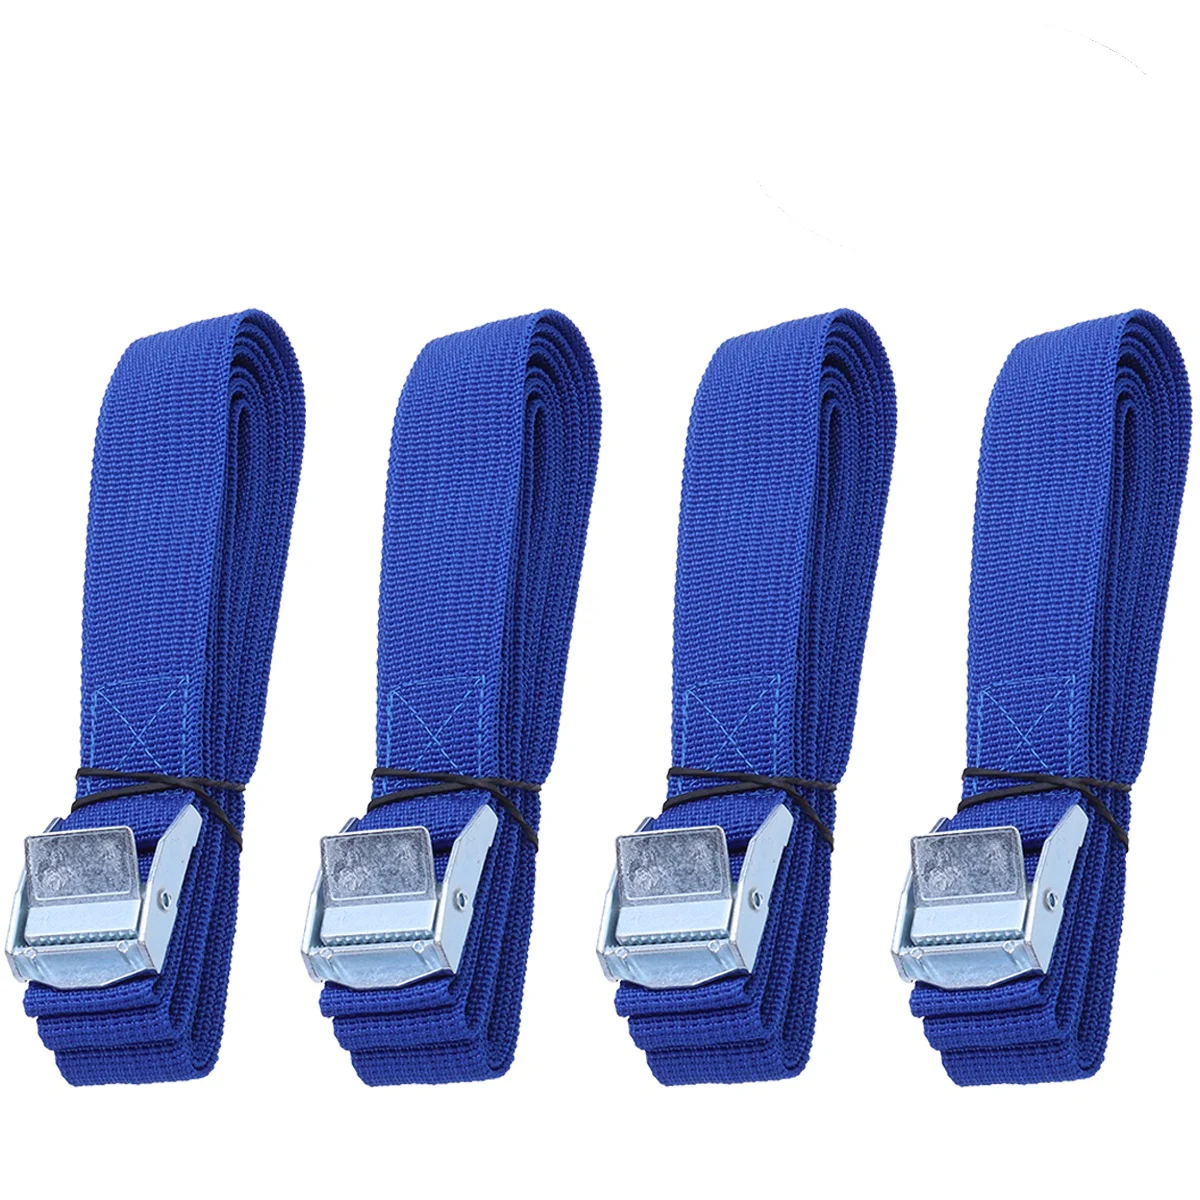 

Straps Lashing Luggage Auto Car Buckles Buckle Roof Belt Vehicle Tie Binding Duty Heavy Down Cam Moving Appliances Ratchet